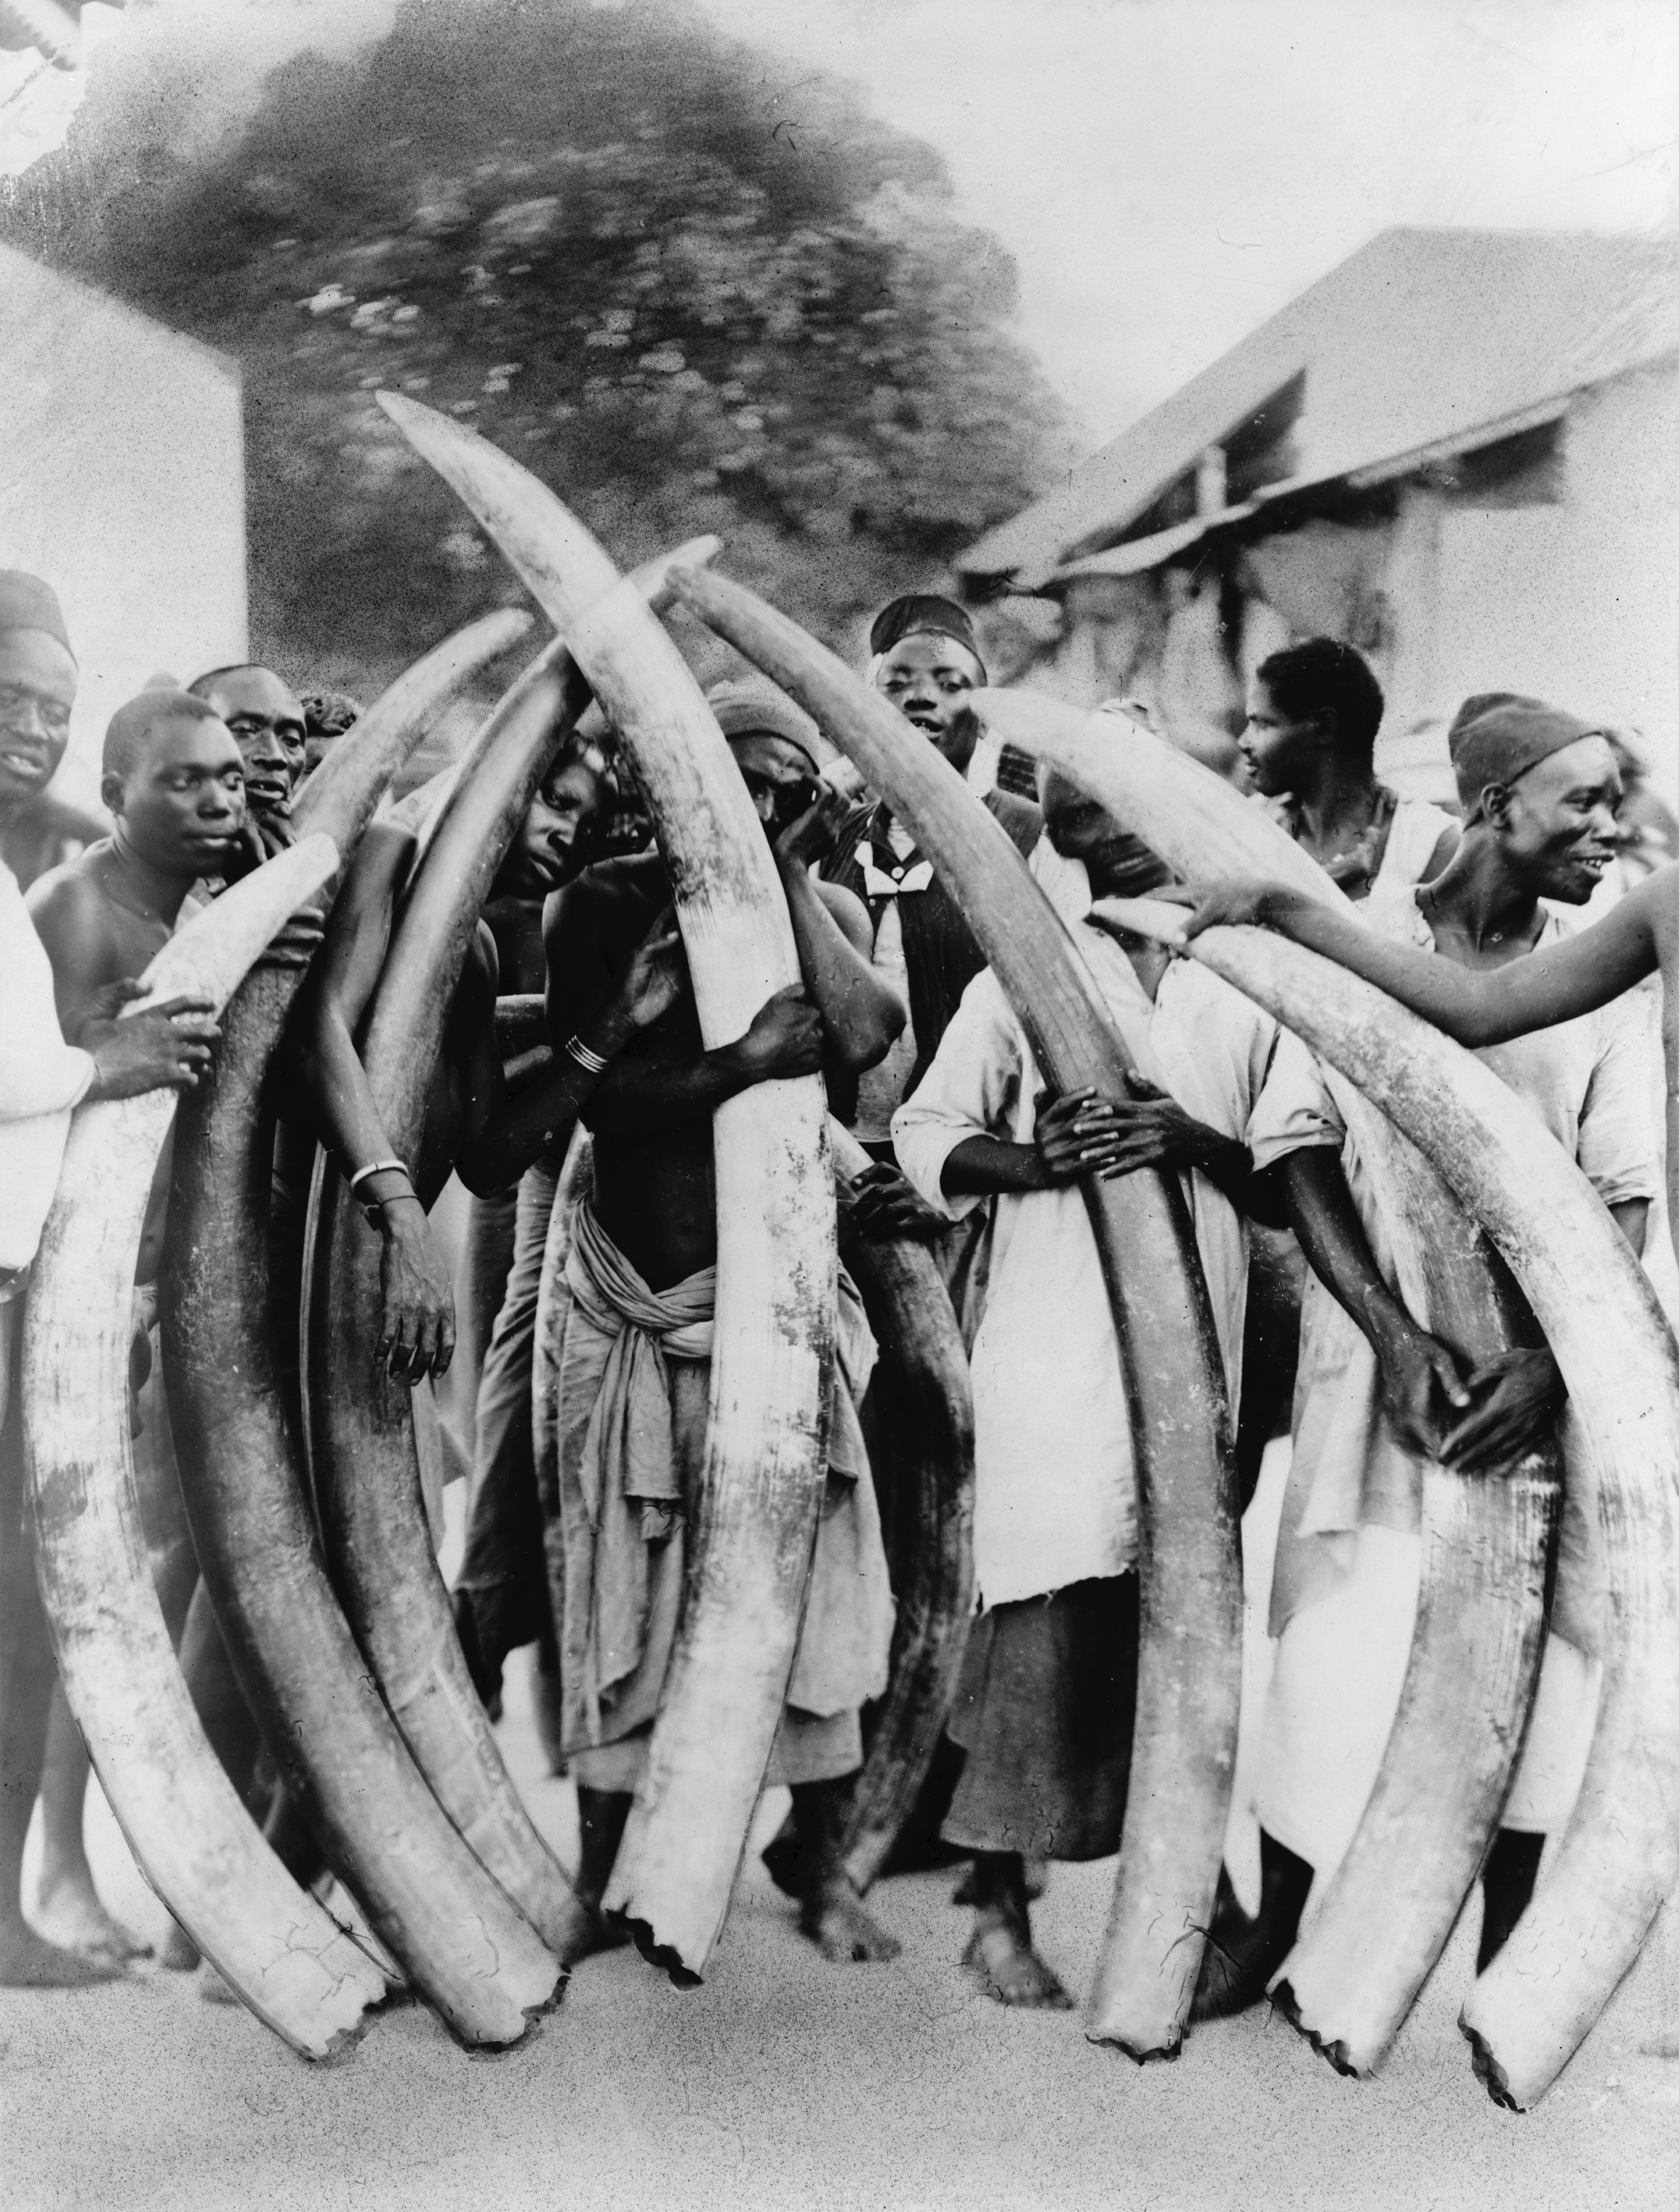 African villagers with elephant ivory tusks.